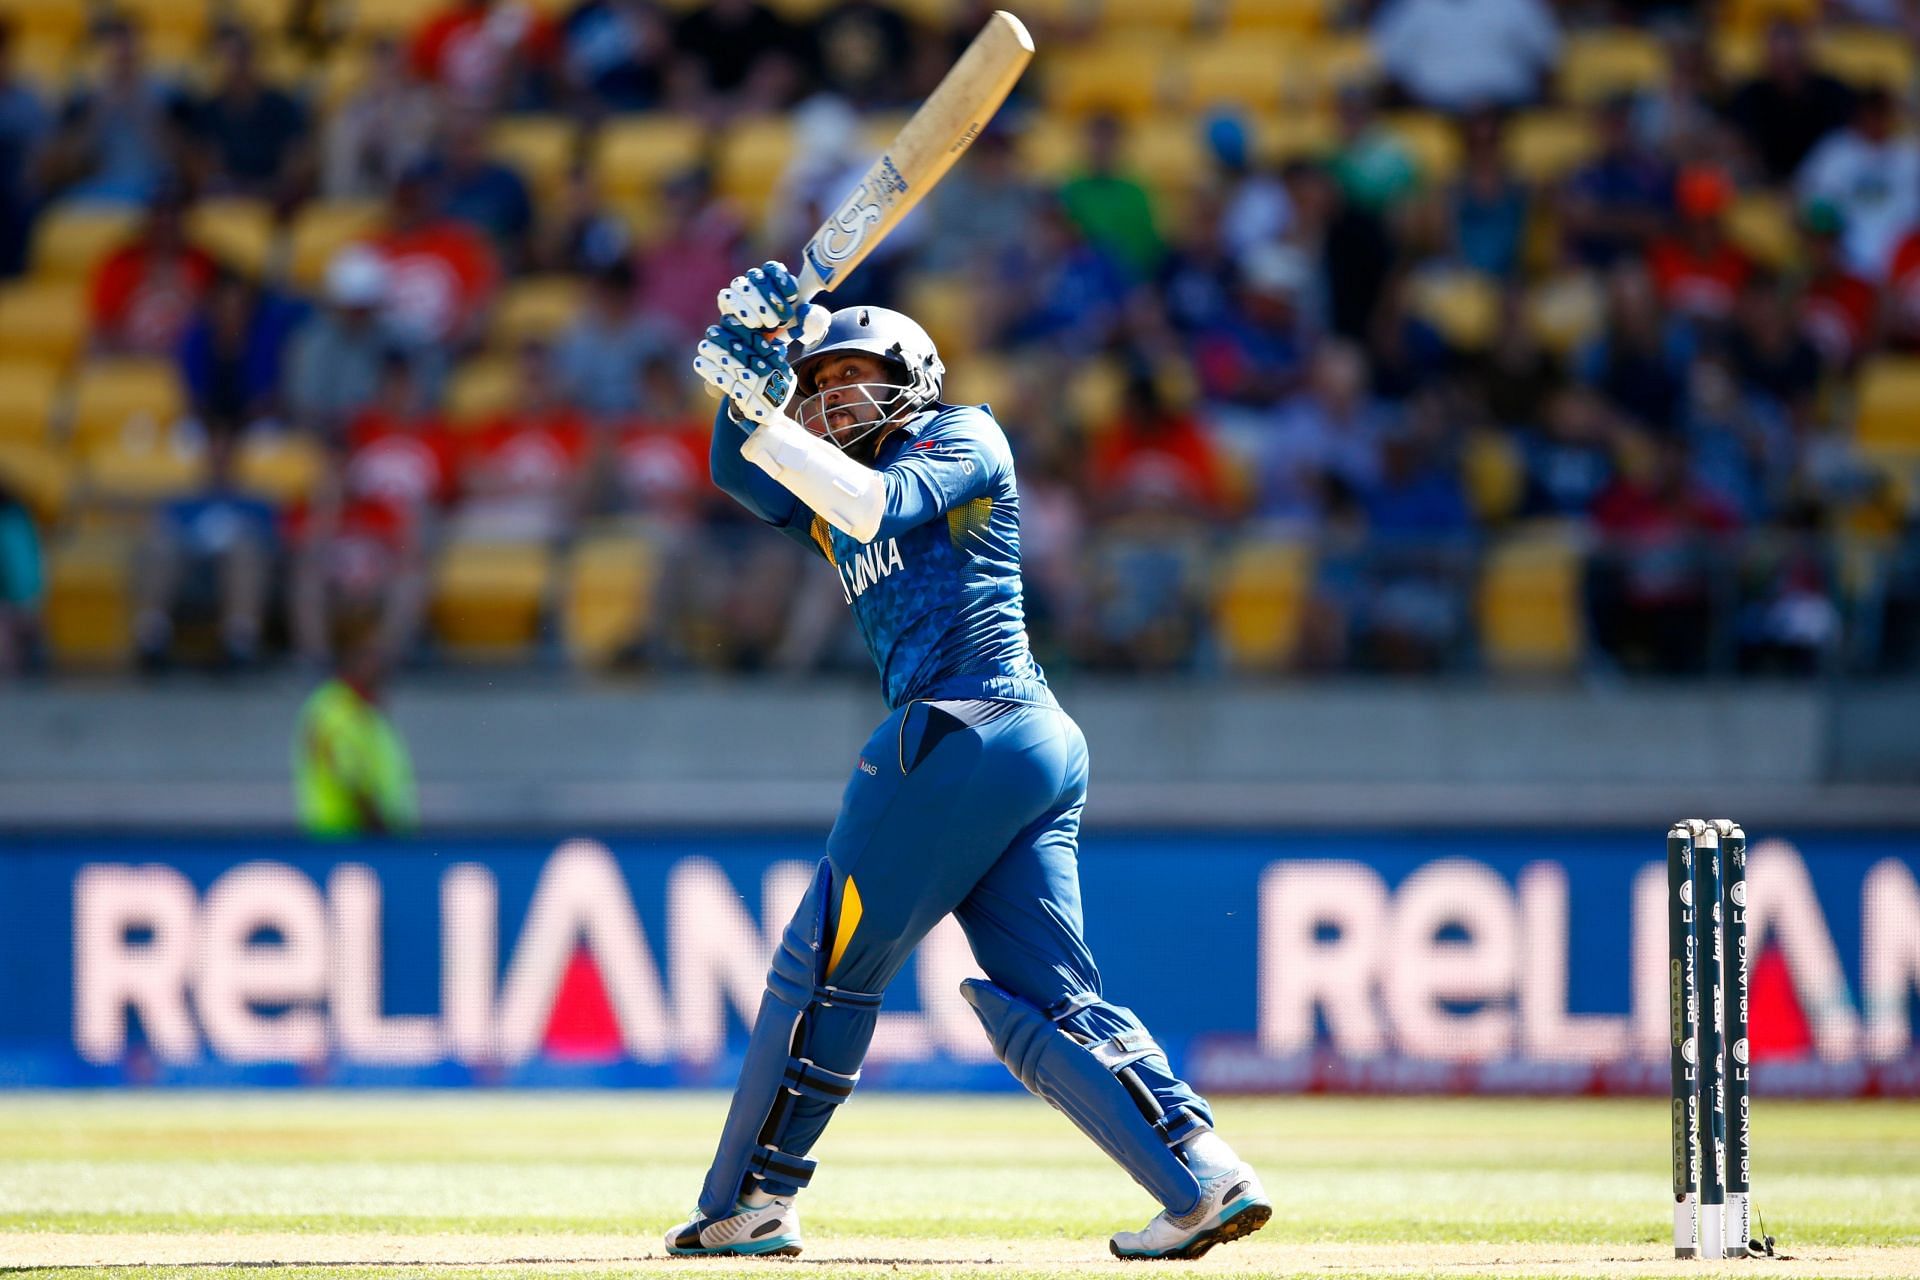 Tilakaratne Dilshan represents World Legends 11 in the Friendship Cup, UAE 2022